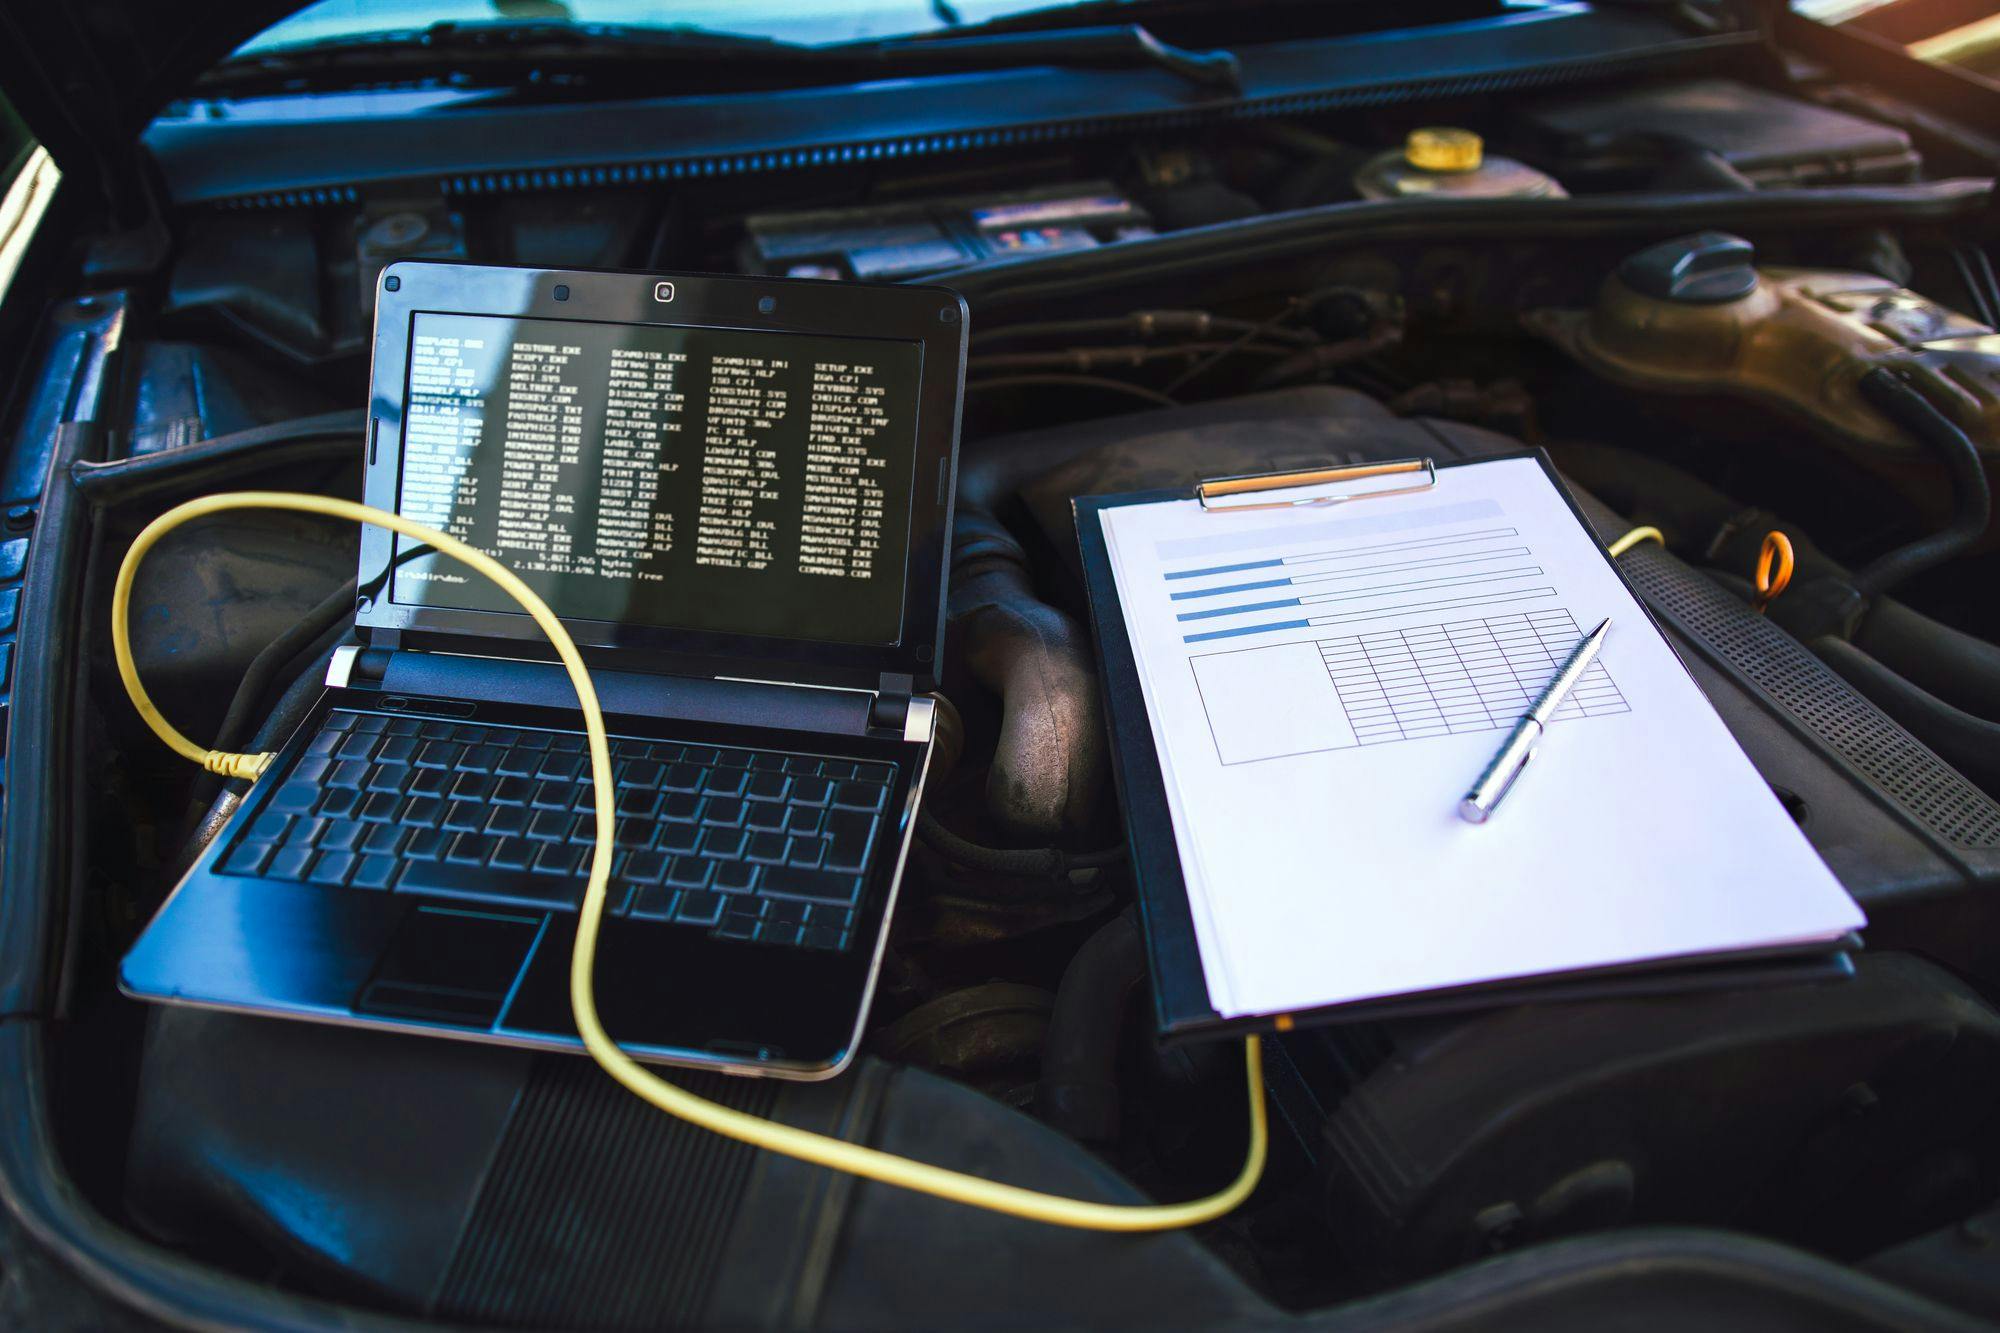 Master advanced diagnostics in diesel repair. Learn to utilize OBD, understand sensors, and interpret fault codes for optimal diesel engine performance.